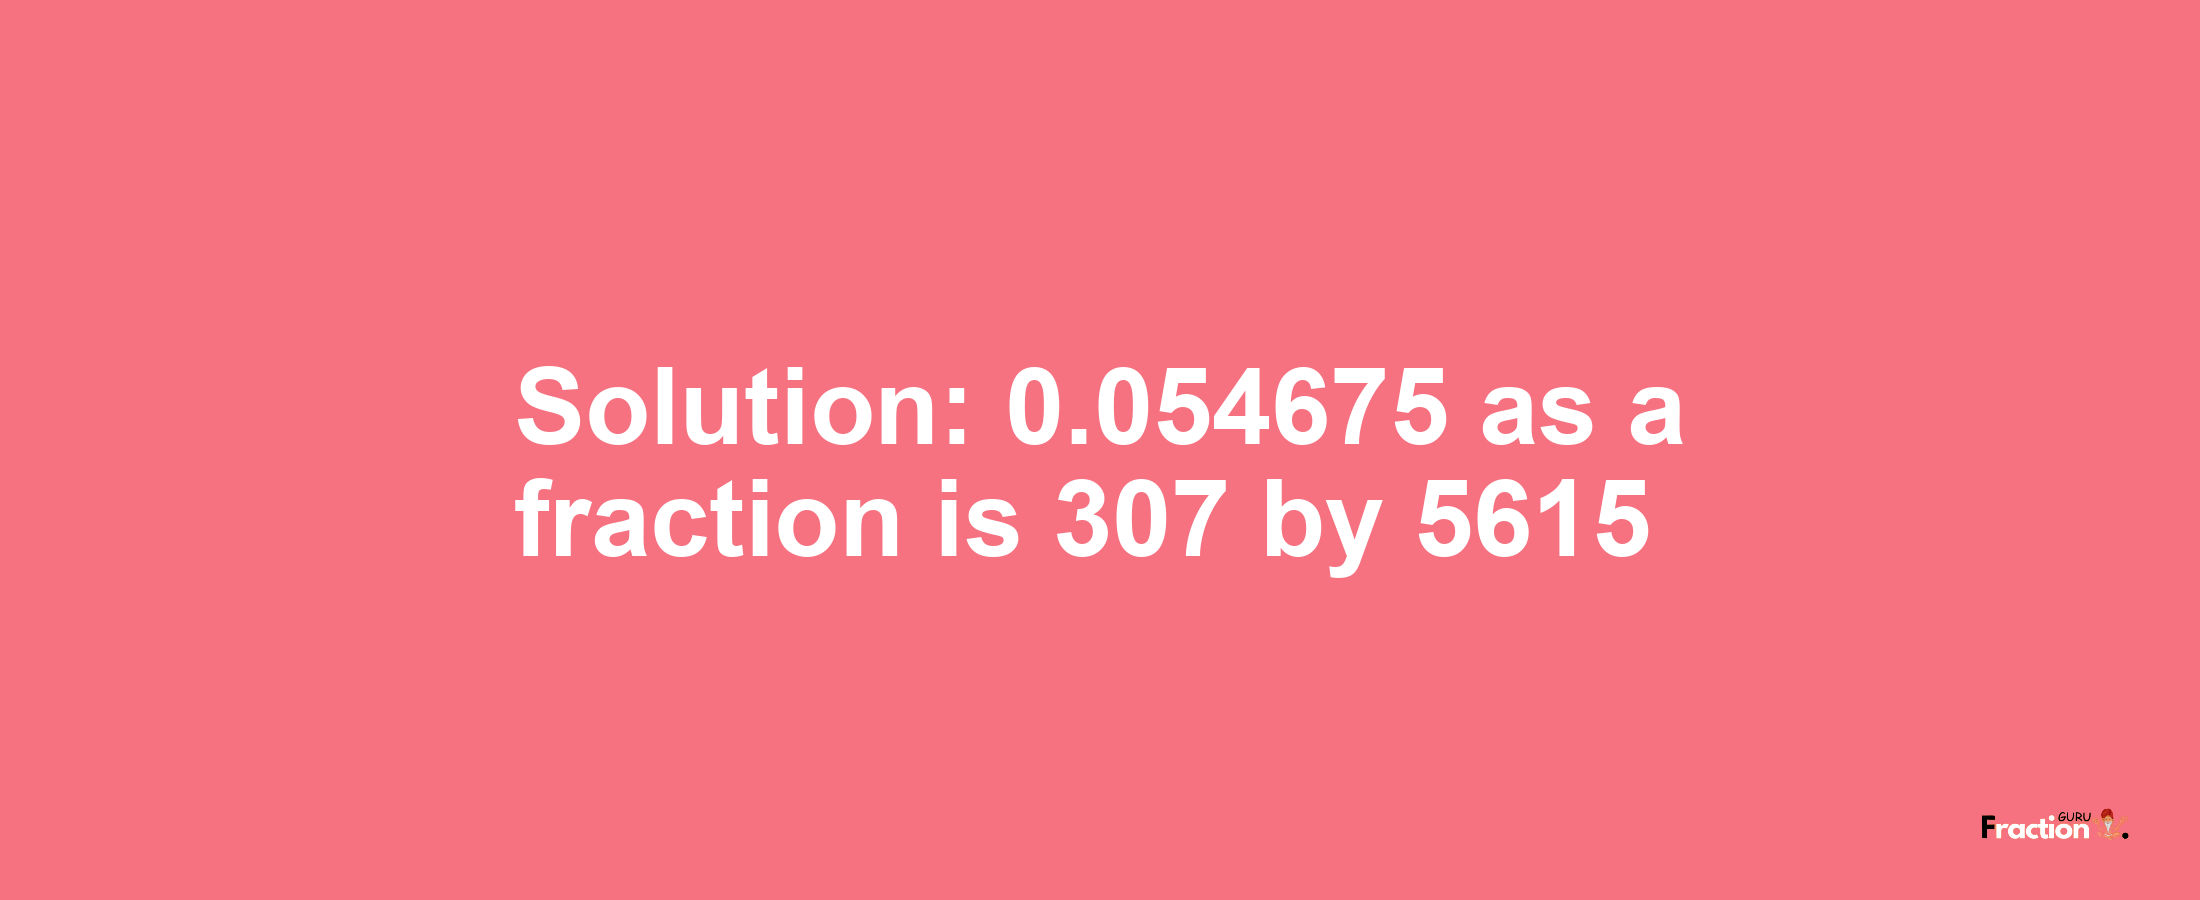 Solution:0.054675 as a fraction is 307/5615